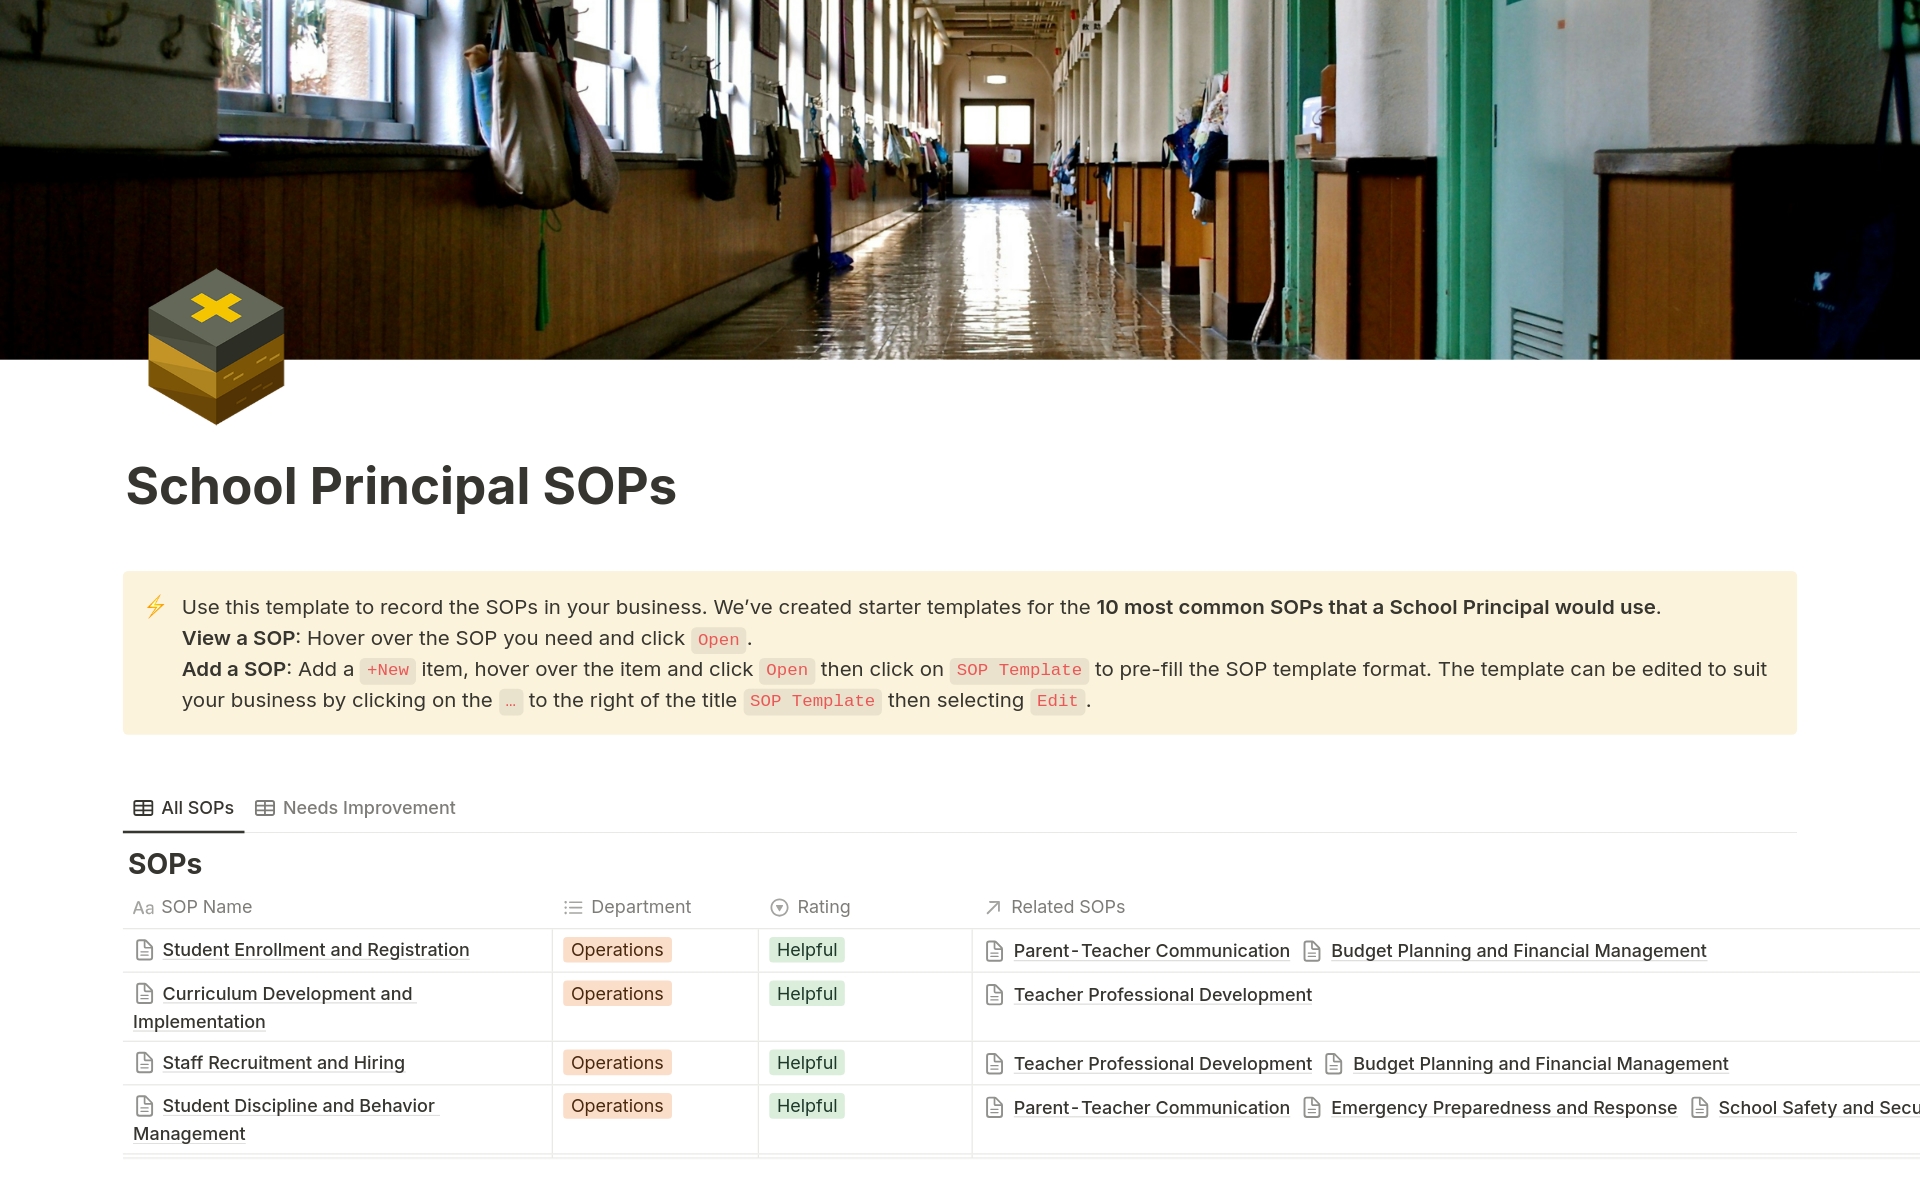 These Standard Operating Procedures (SOPs) for a school principal are used to effectively manage various aspects of school administration. Includes 20+ pages of best practice SOPs to save you 10+ hours of research.